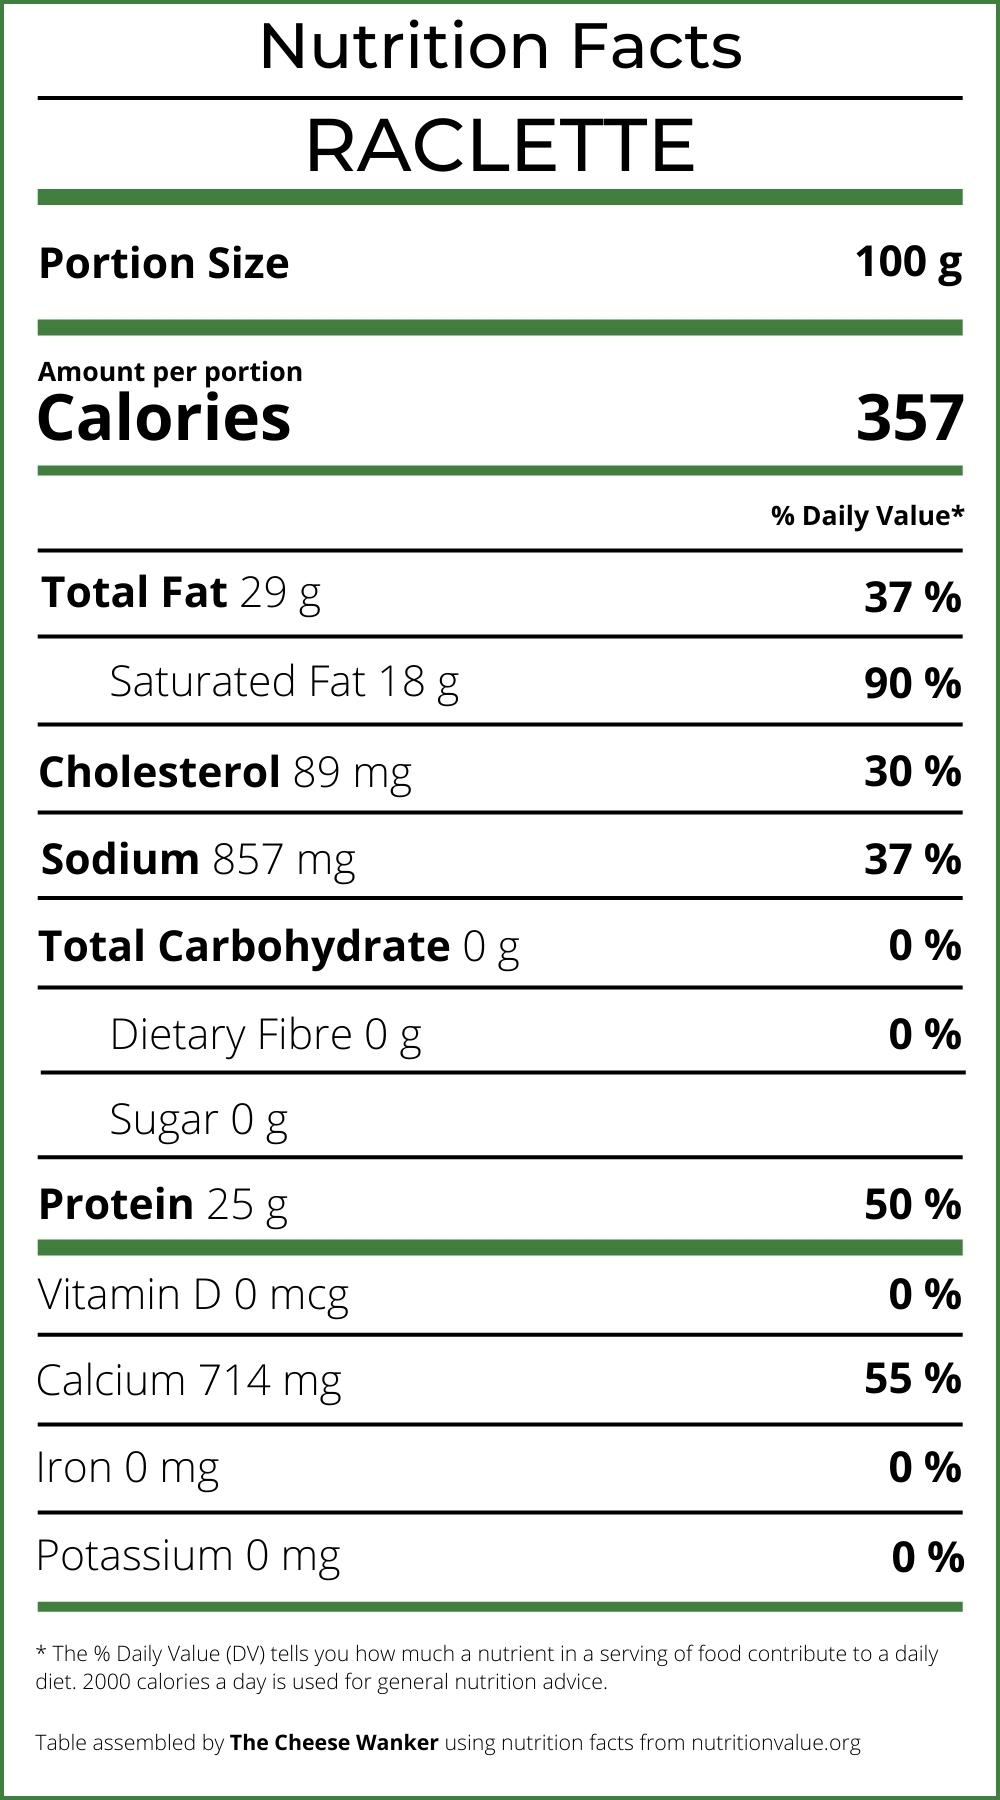 Raclette Nutrition Facts